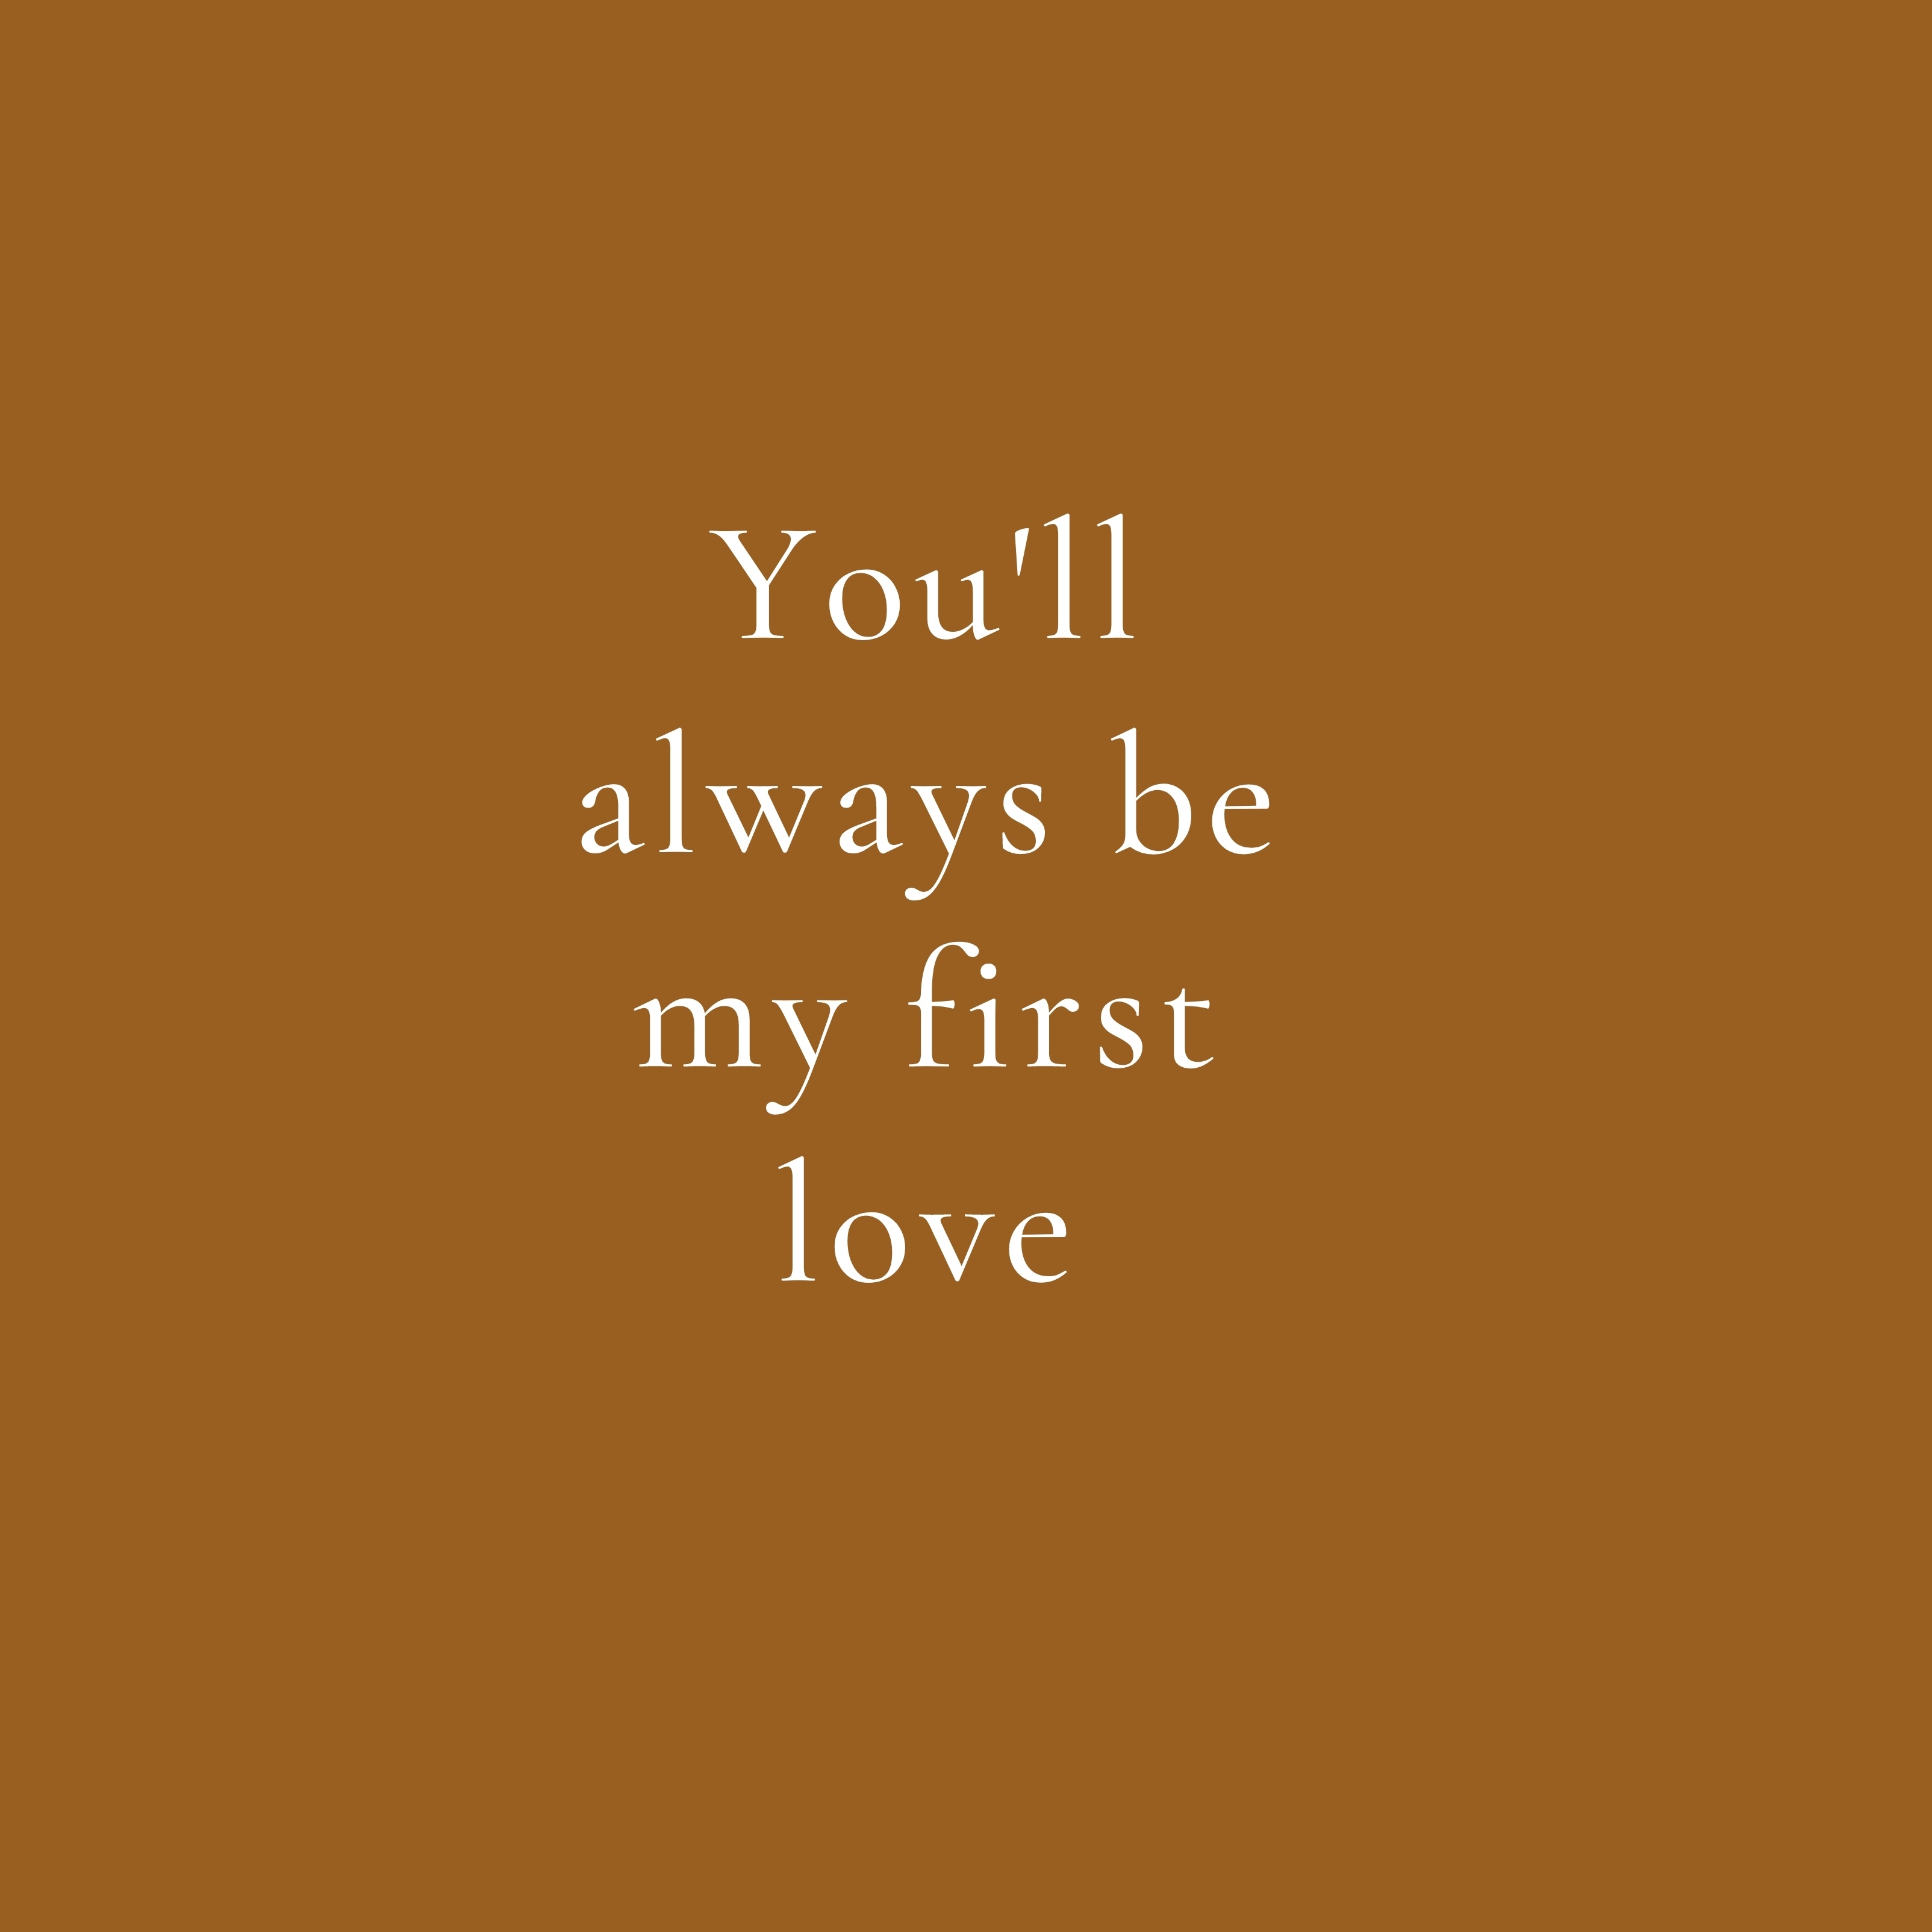 iPad Wallpapers You Will Always Be My First Love Quote iPad Wallpaper 3208x3208 px